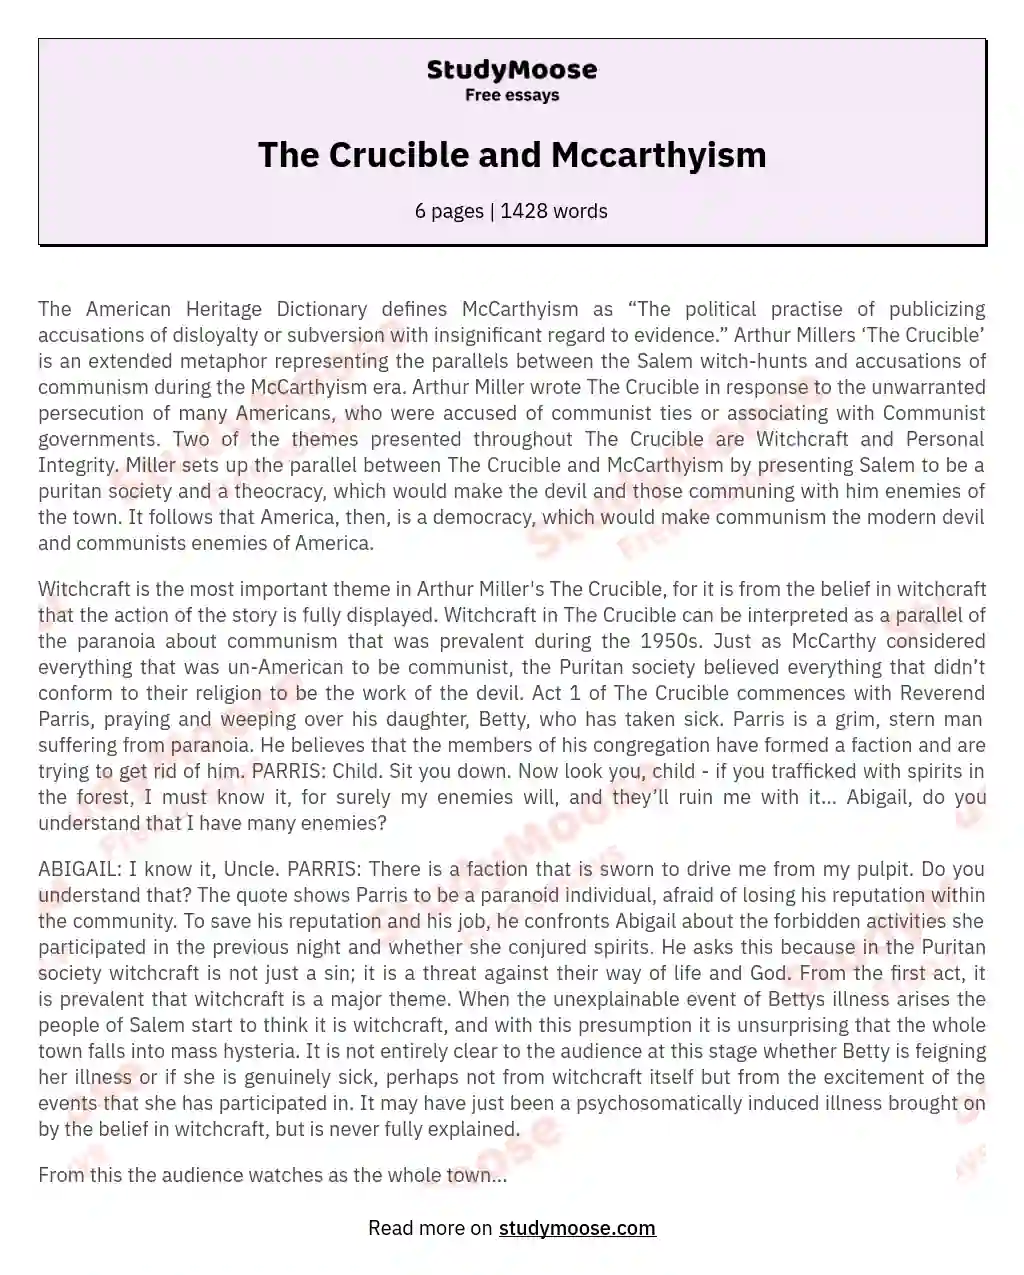 The Crucible and Mccarthyism essay